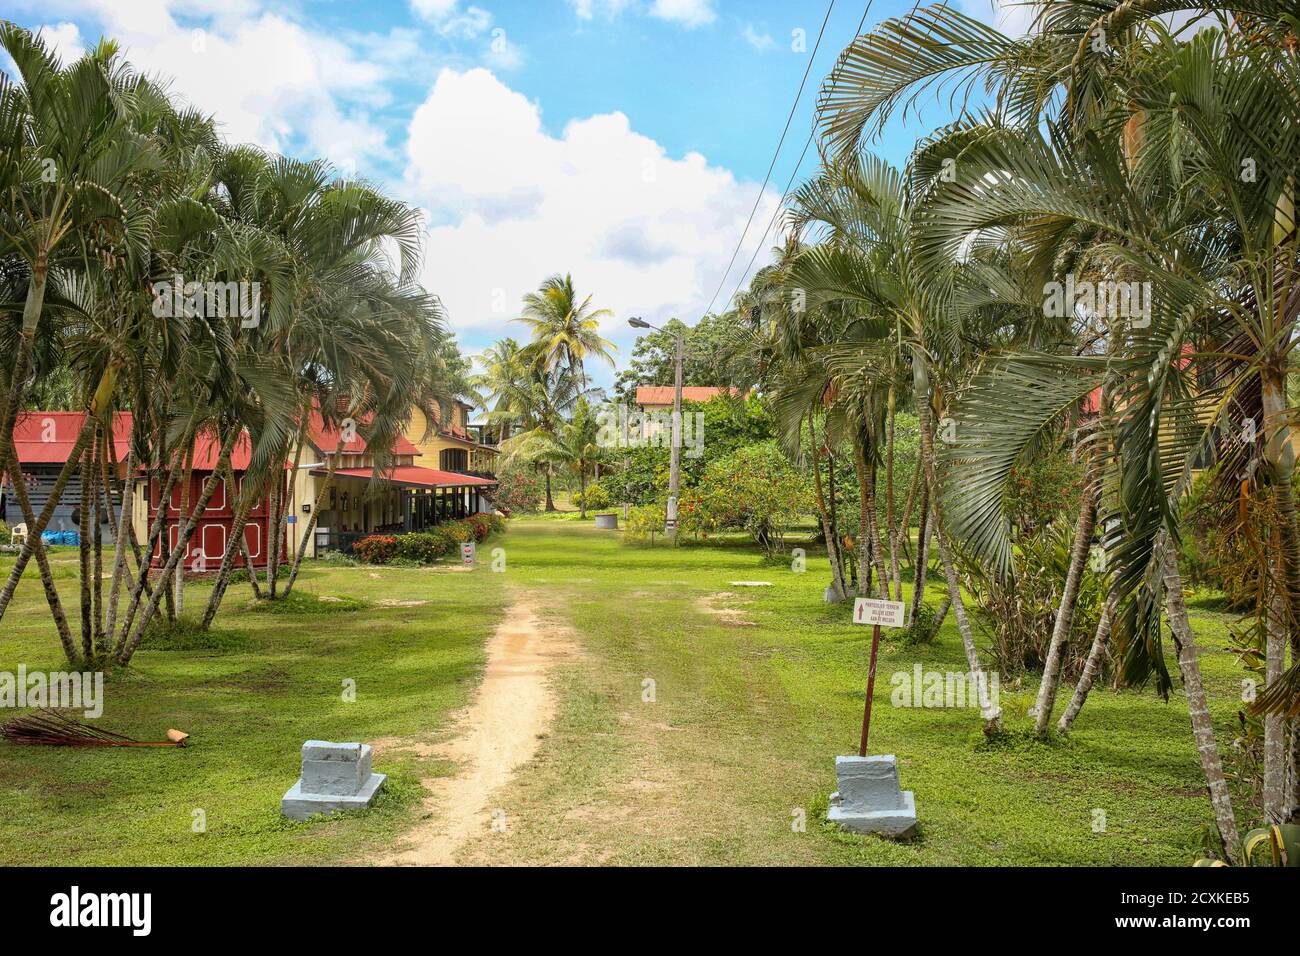 Restored plantation called Frederiksdorp at the Commewijne river. Now hotel. In Suriname, South America Stock Photo